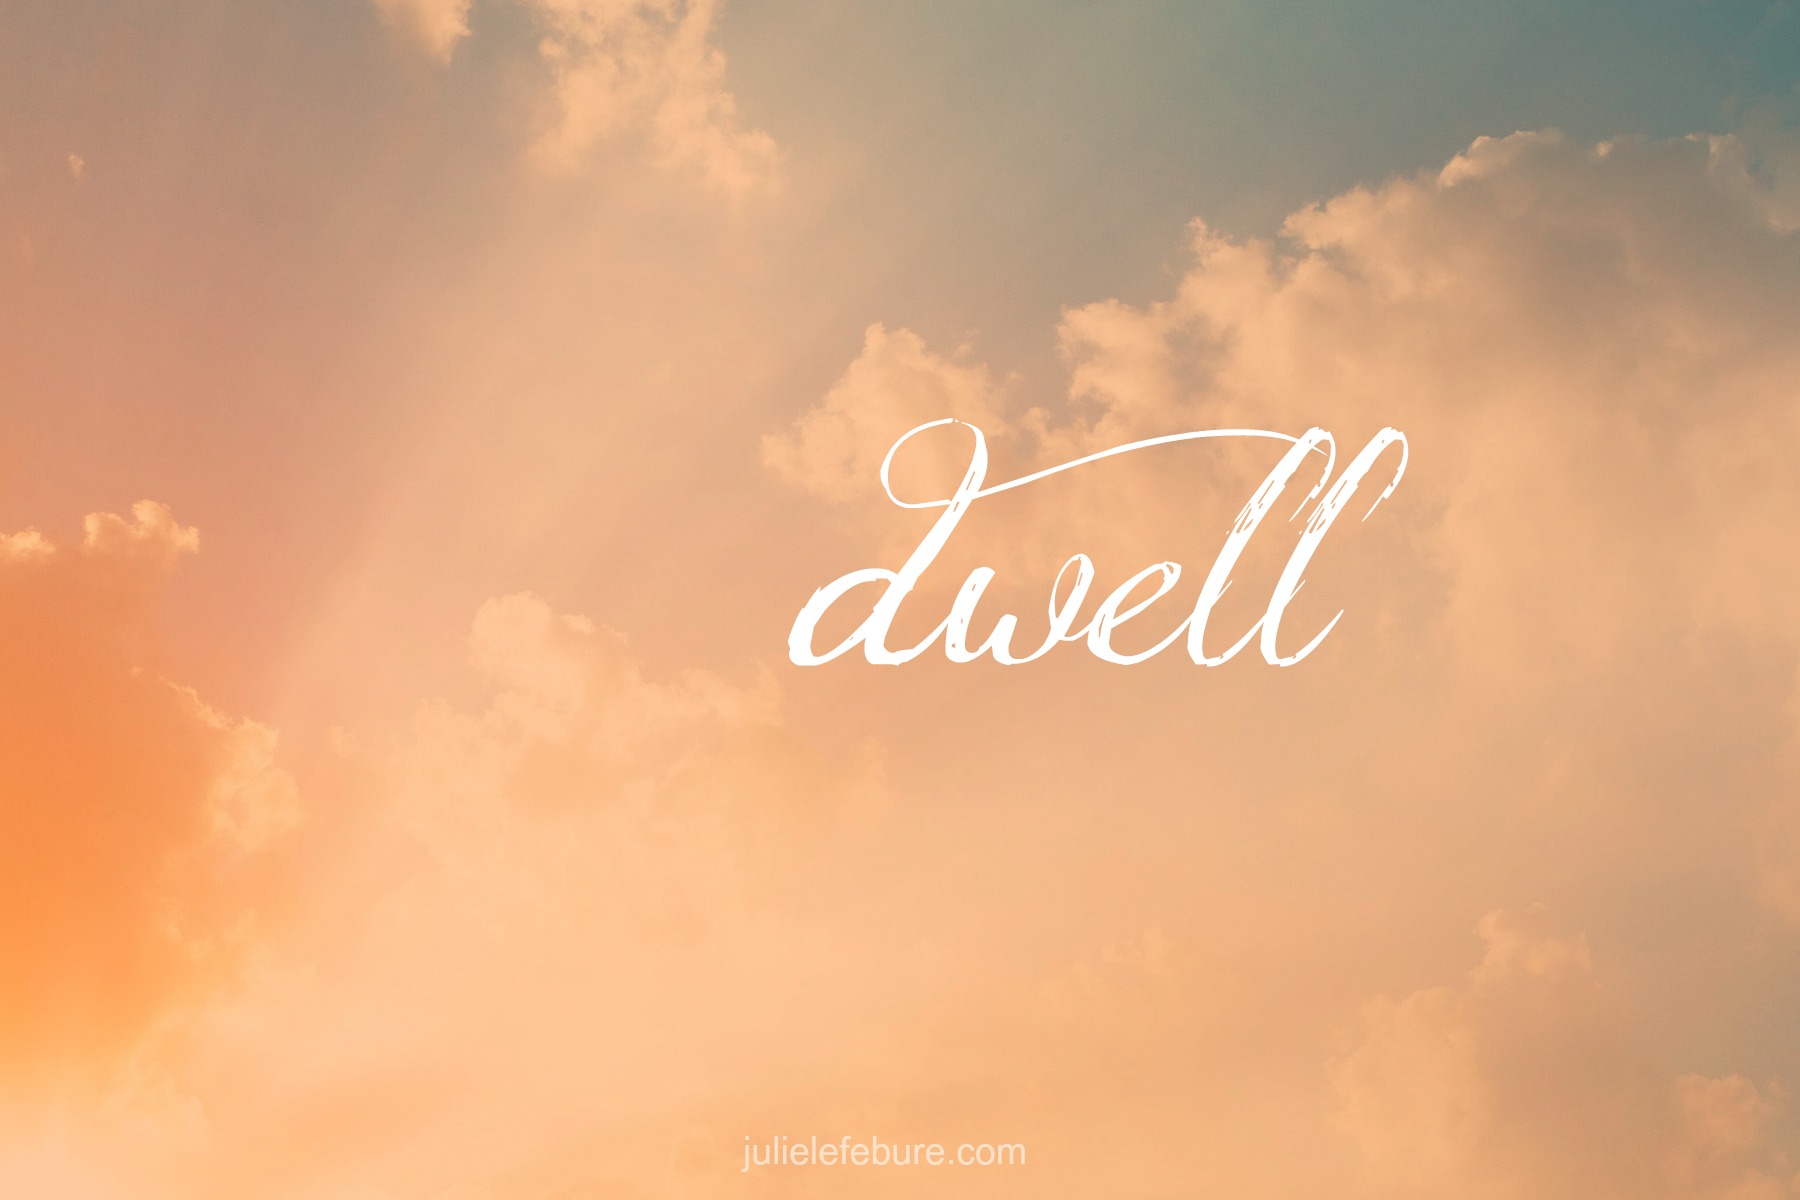 Five Minute Friday – Dwell